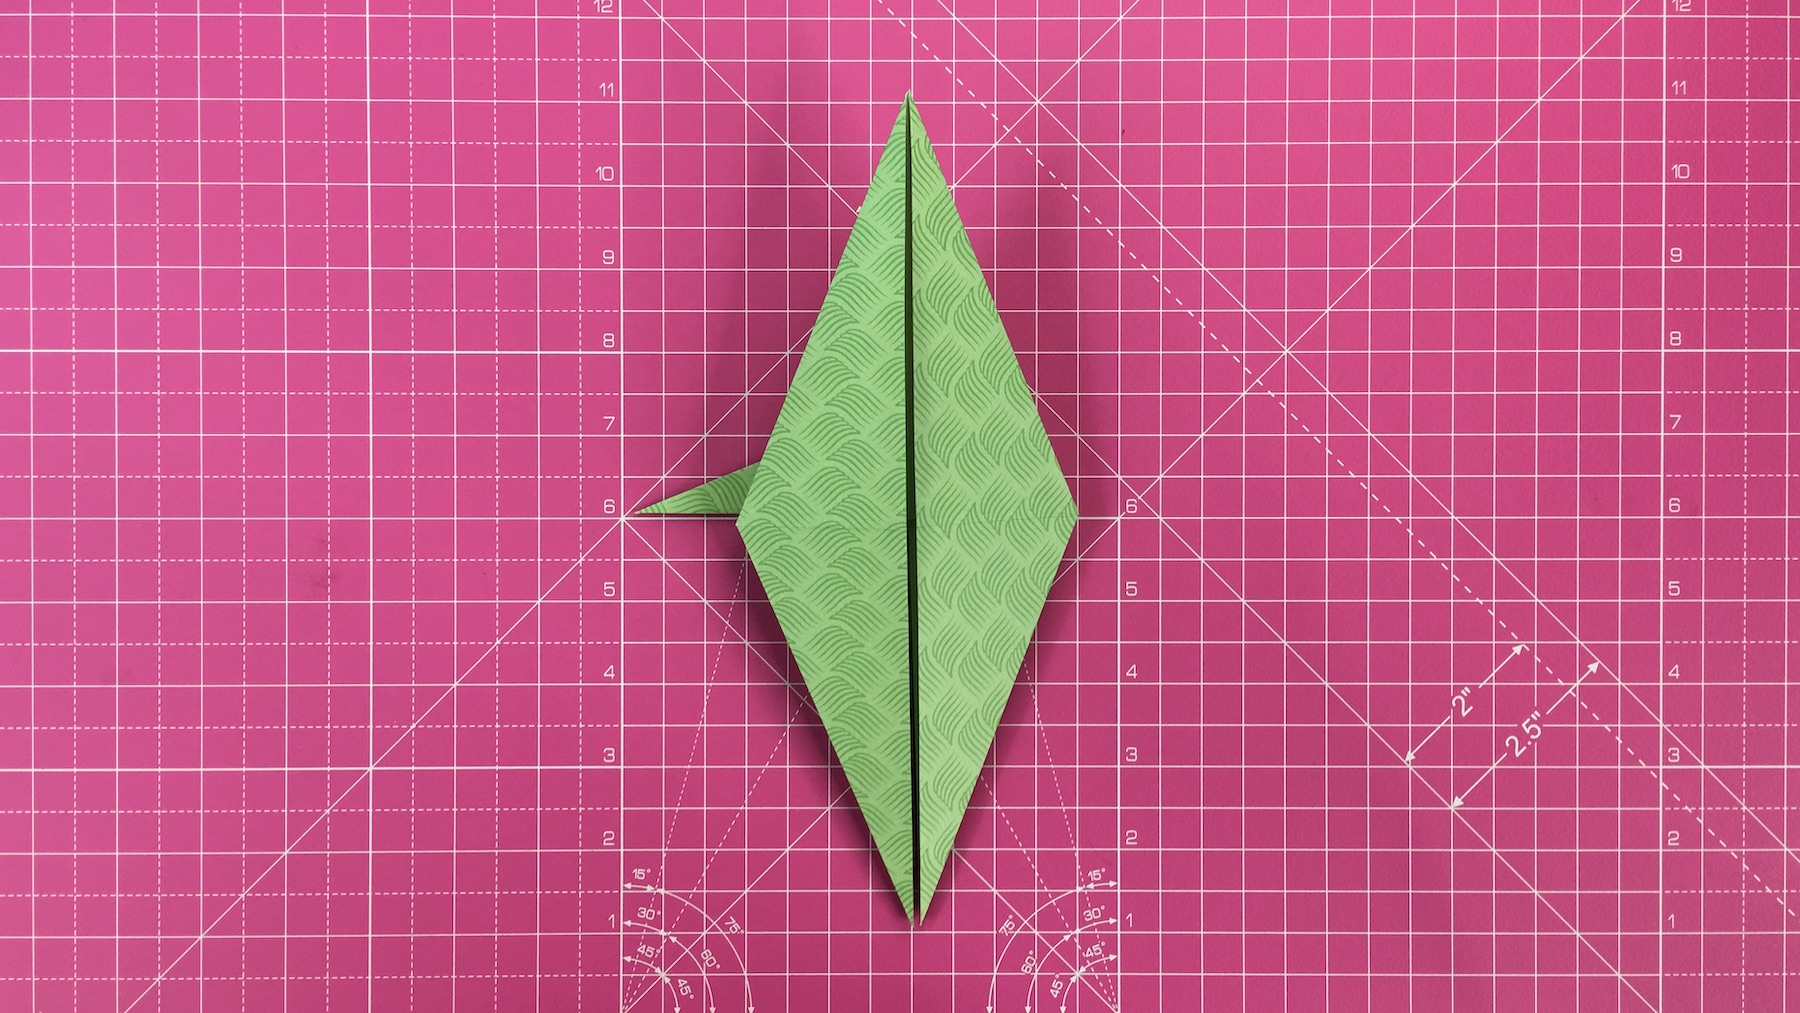 How to make an origami dragon, origami dragon tutorial - step 22a